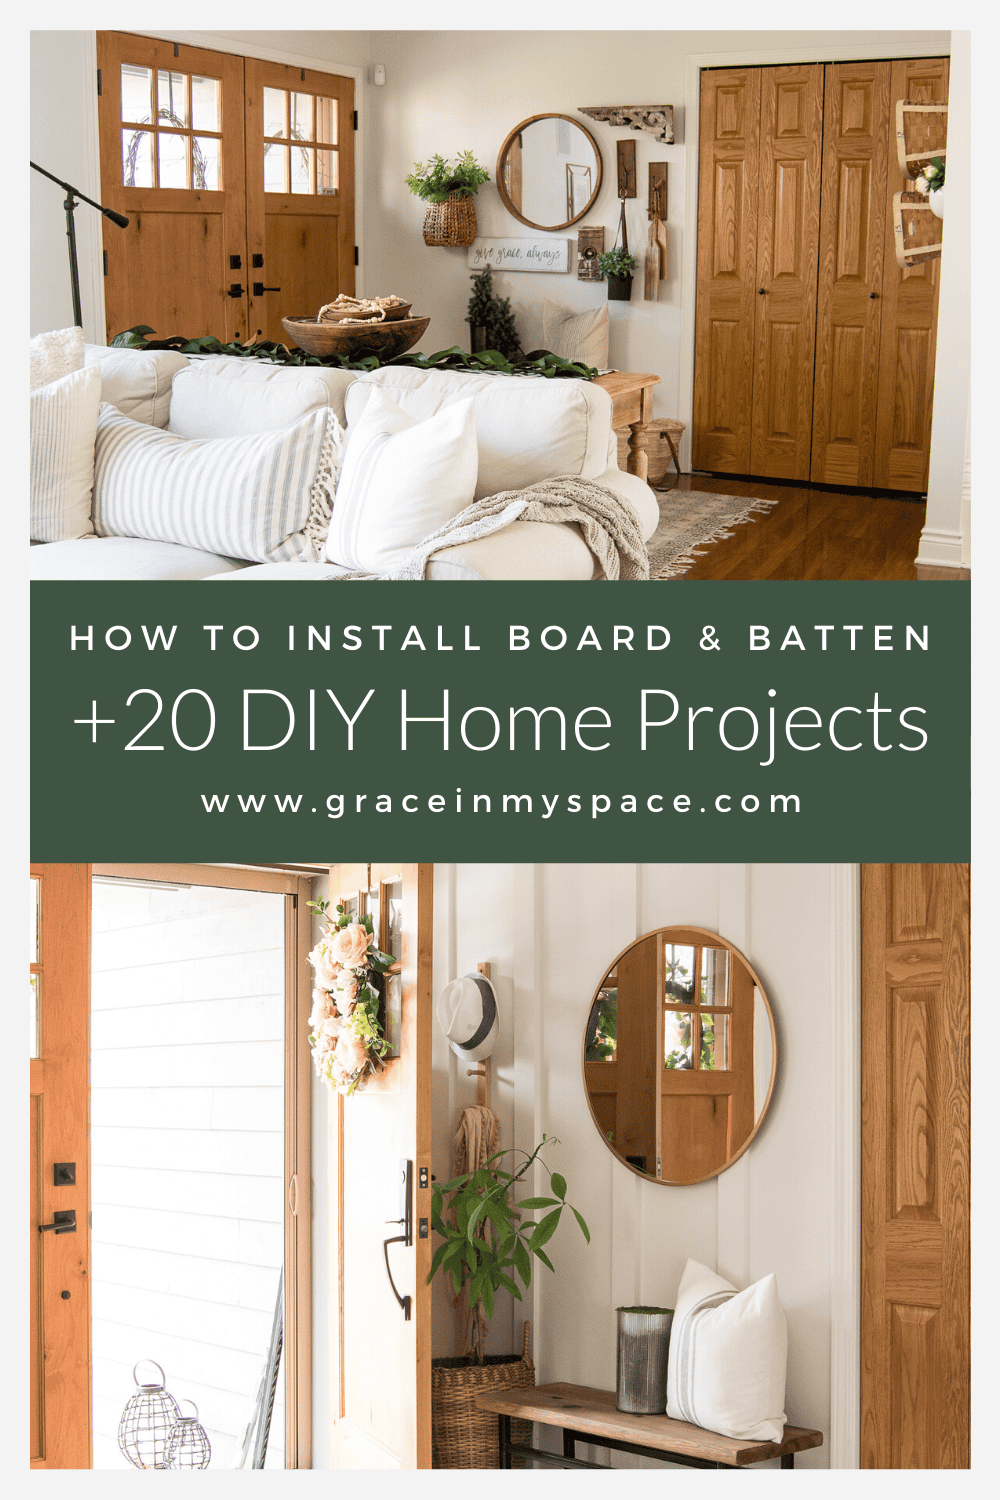 How to install board and batten